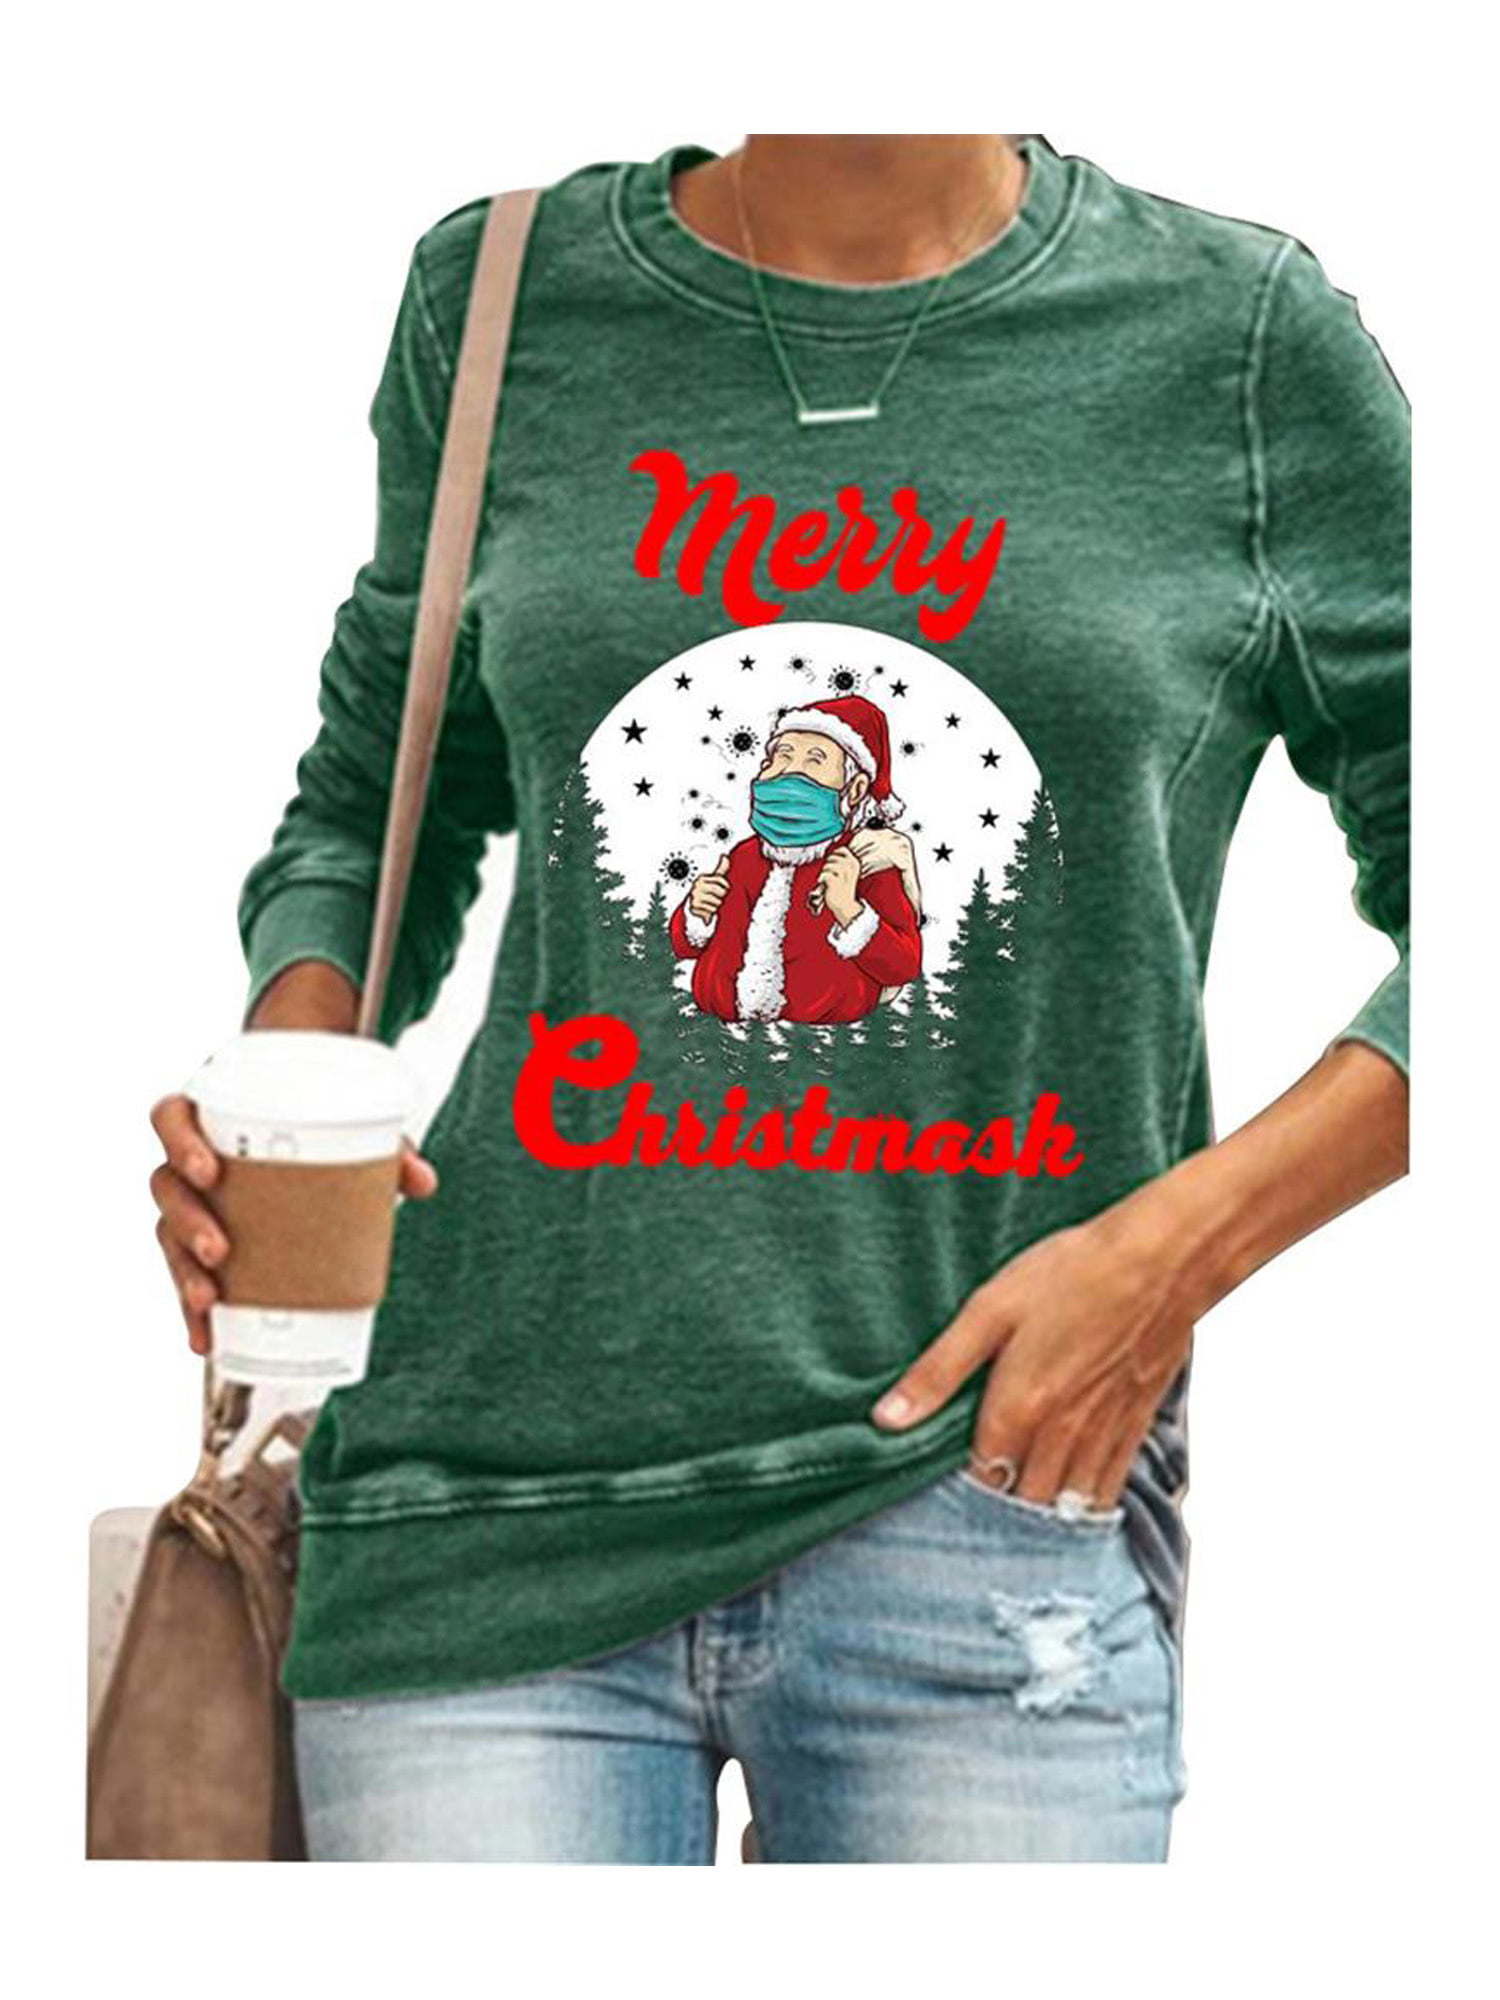 Womens Christmas Blouse Tops Ladies Casual Loose Pullover Tunic Xmas T Shirt Tee